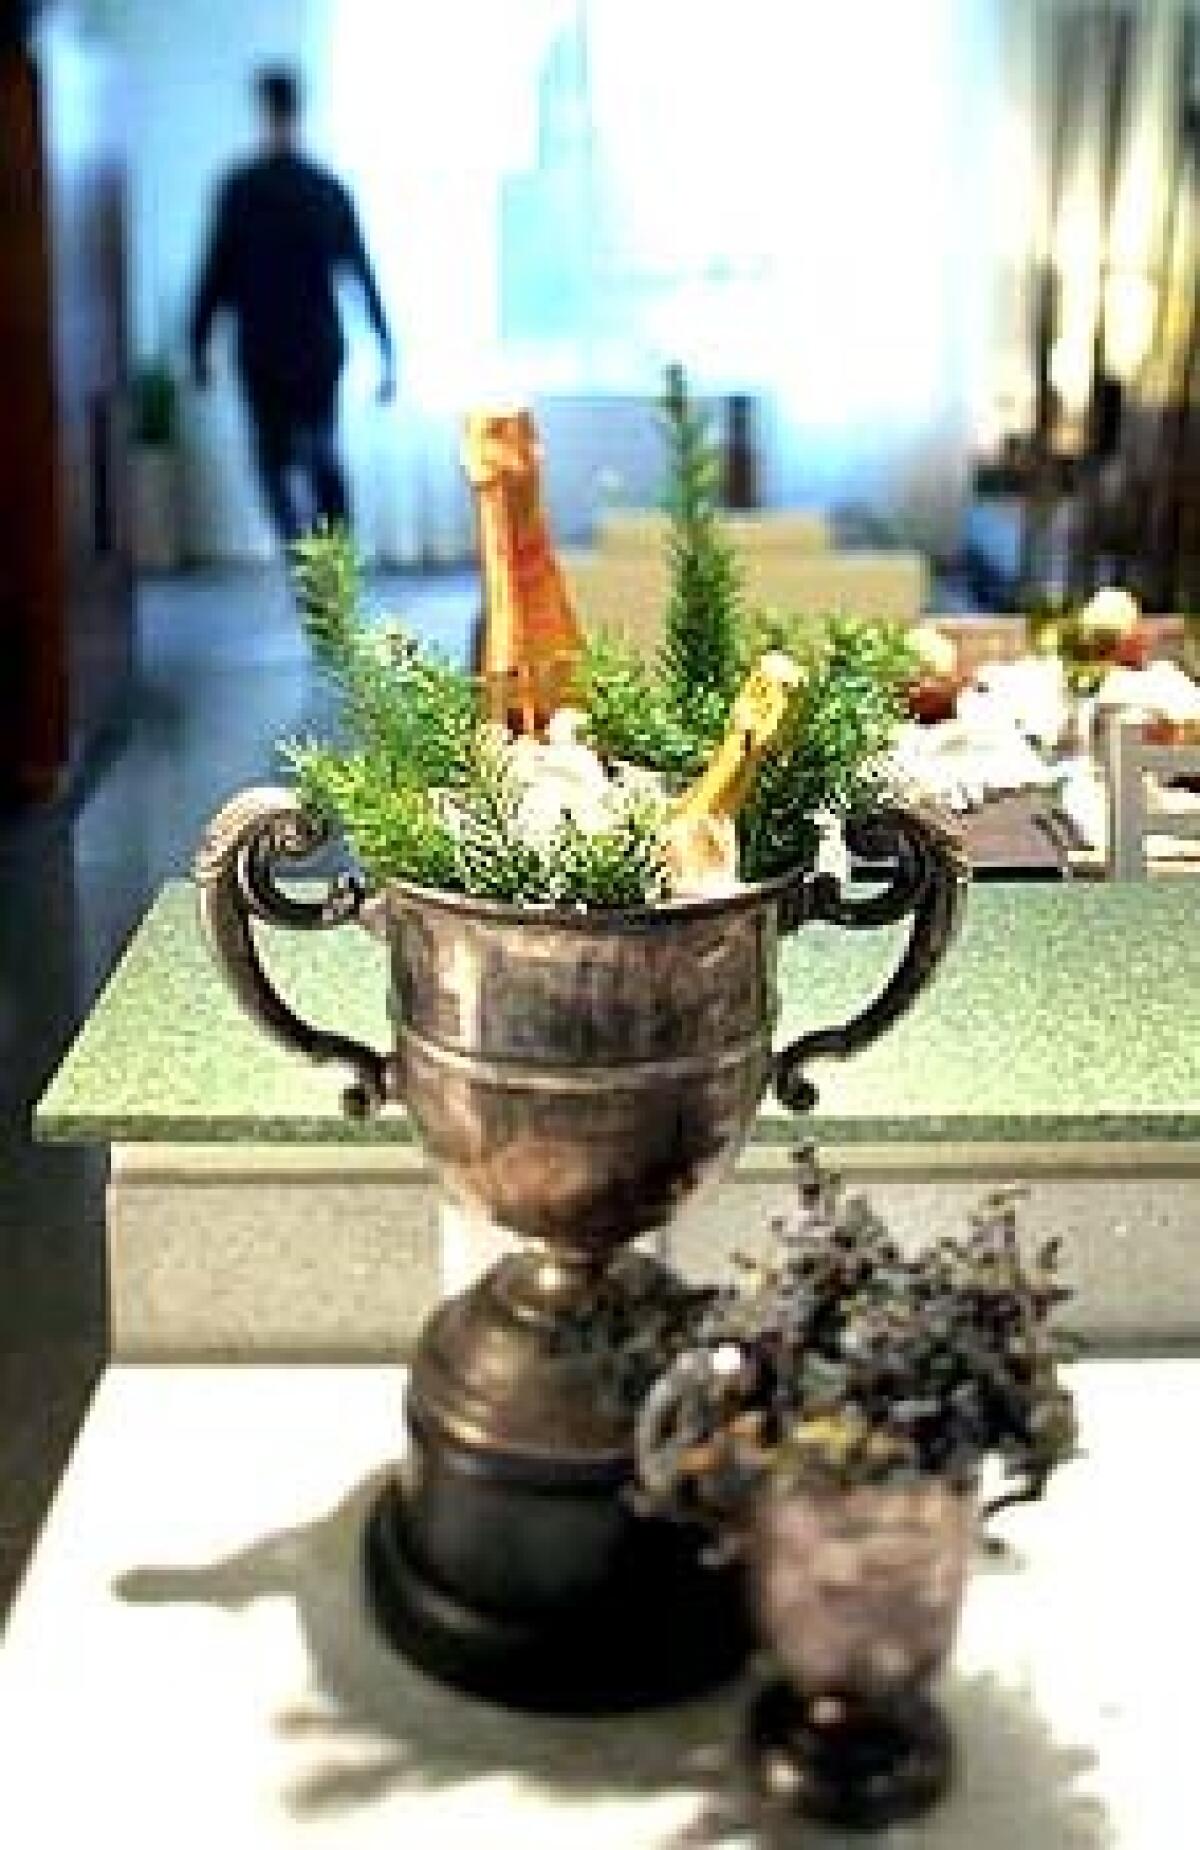 Bottles of Champagne ice up with sprigs of winter greenery in an antique trophy bucket that flaunts its age in unpolished splendor. In the foreground, a smaller vase holds black privet berry.